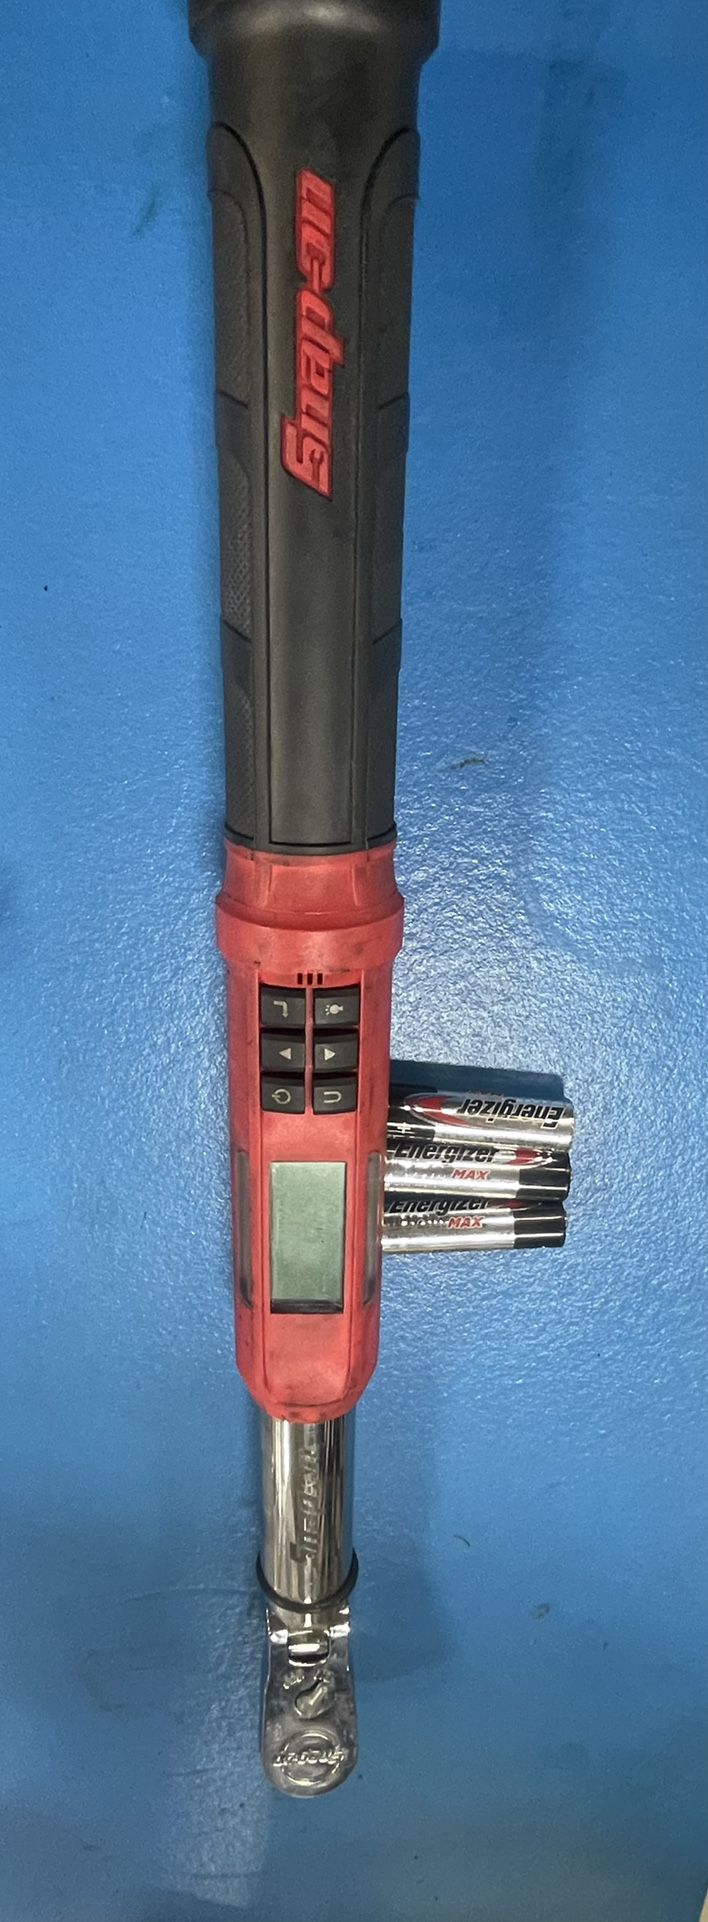 Snap On 3/8 Torque Wrench